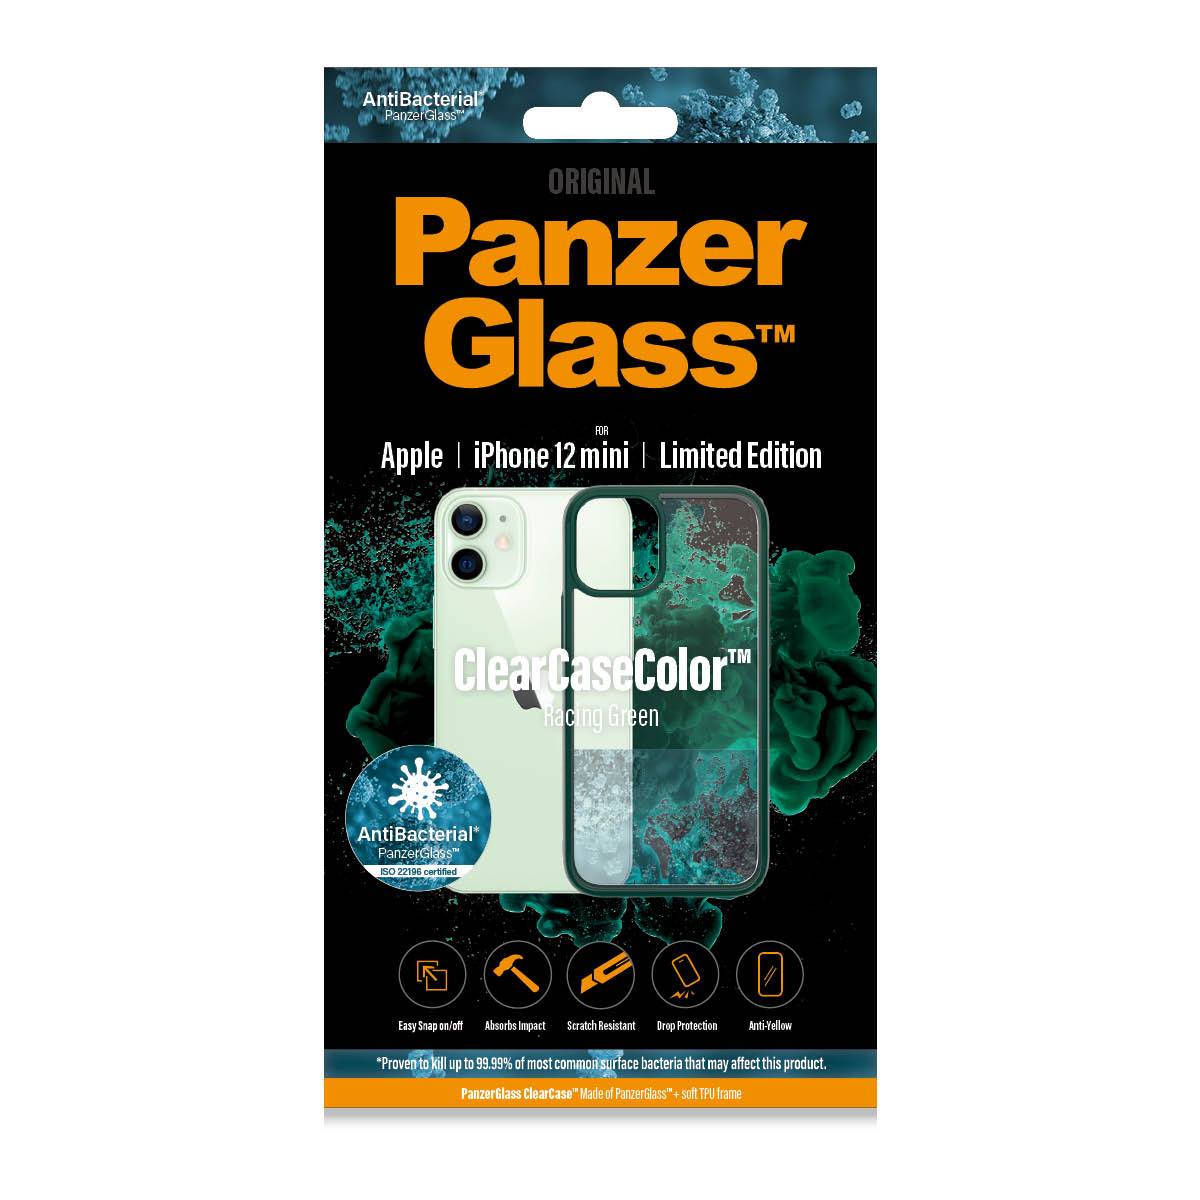 PanzerGlass™ ClearCaseColor™ Apple  iPhone 12 mini - Racing Green Limited Edition (0267), Most powerful ClearCase™ ever